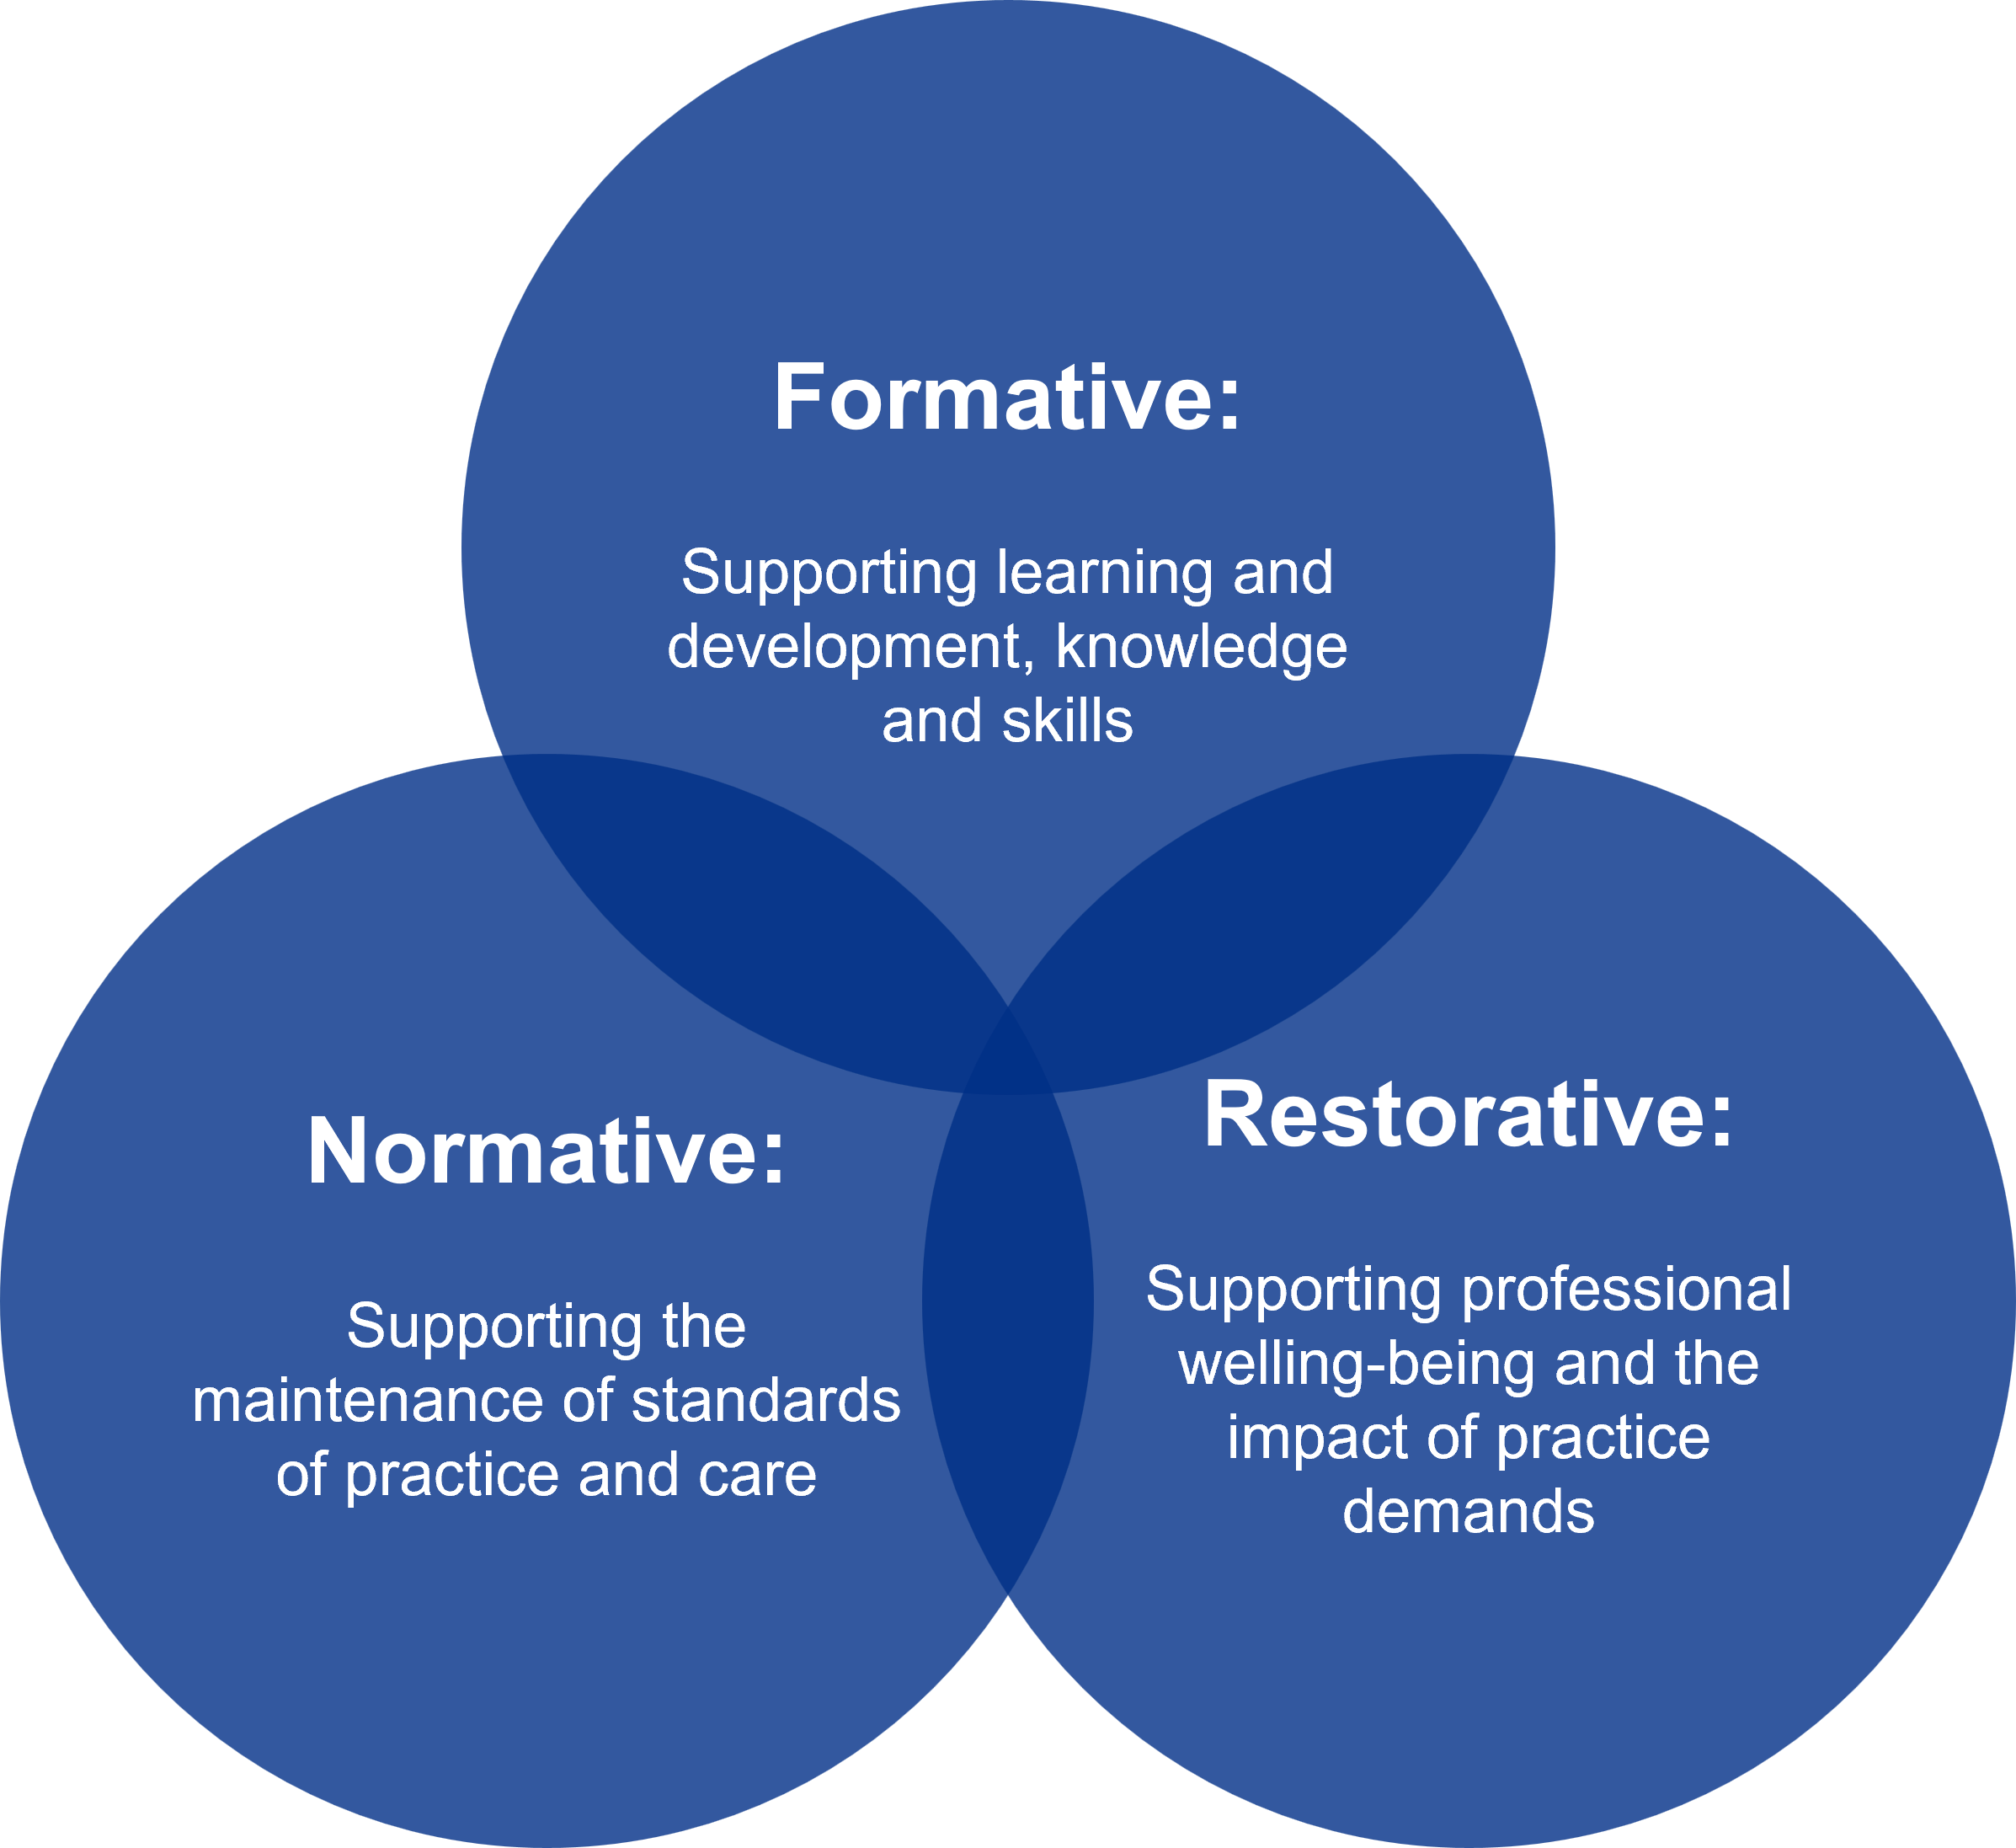 Proctors model of supervision
Formative:
Supporting learning and development, knowledge and skills
Restorative:
Supporting professional welling-being and the impact of practice demands
Normative: Supporting the maintenance of standards of practice and care